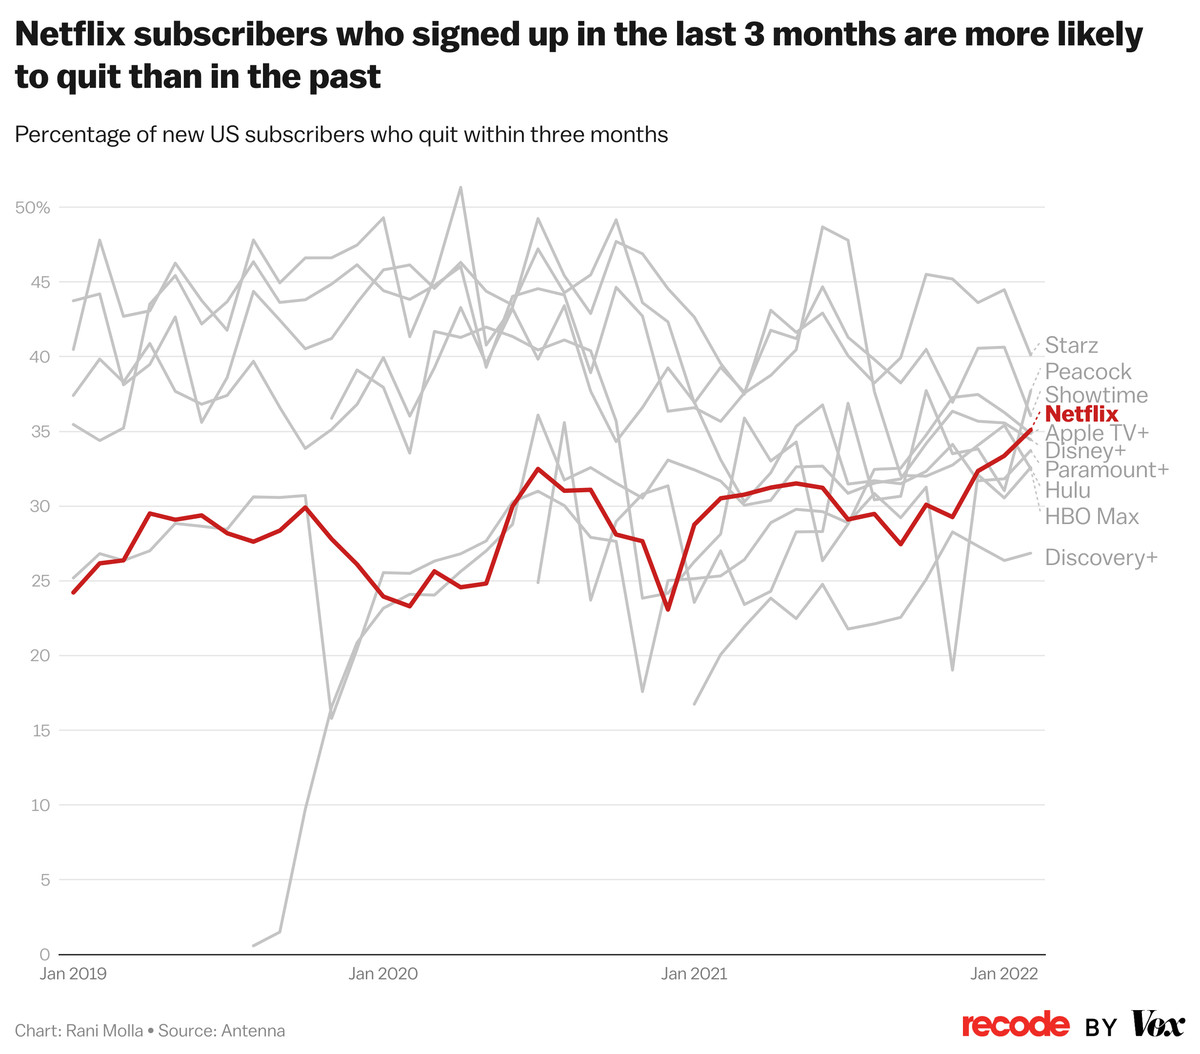 Netflix subscribers who signed up in the last 3 months are more likely to quit than in the past 